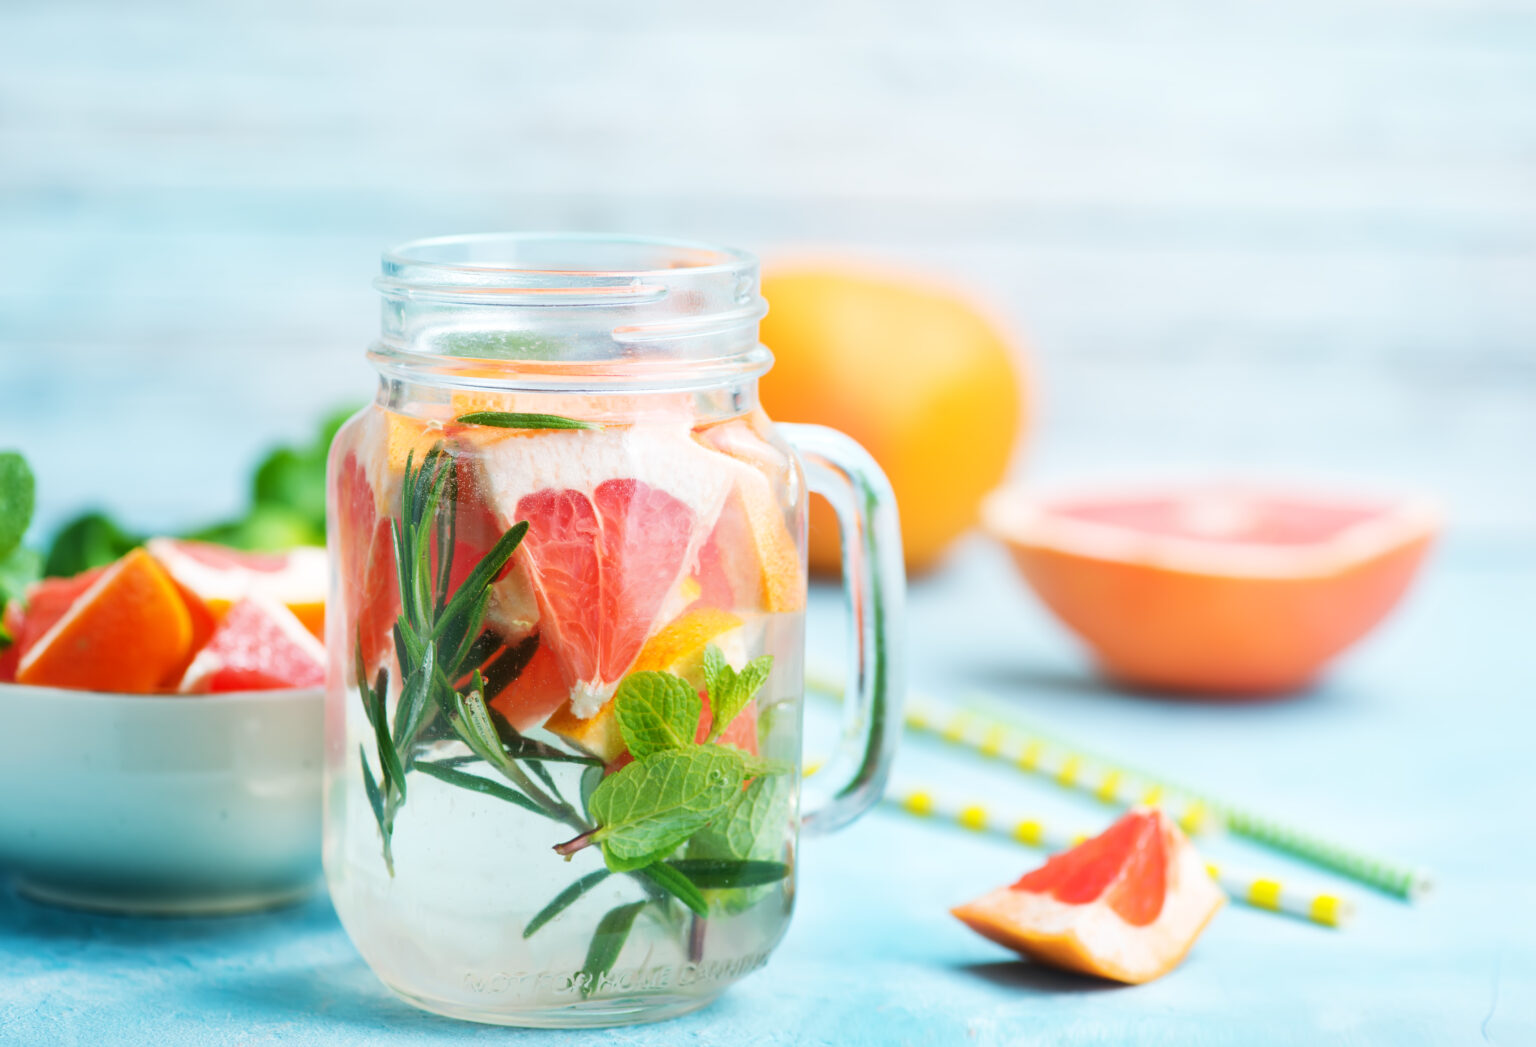 Is grapefruit Keto Friendly? (Yes, But In Moderation)